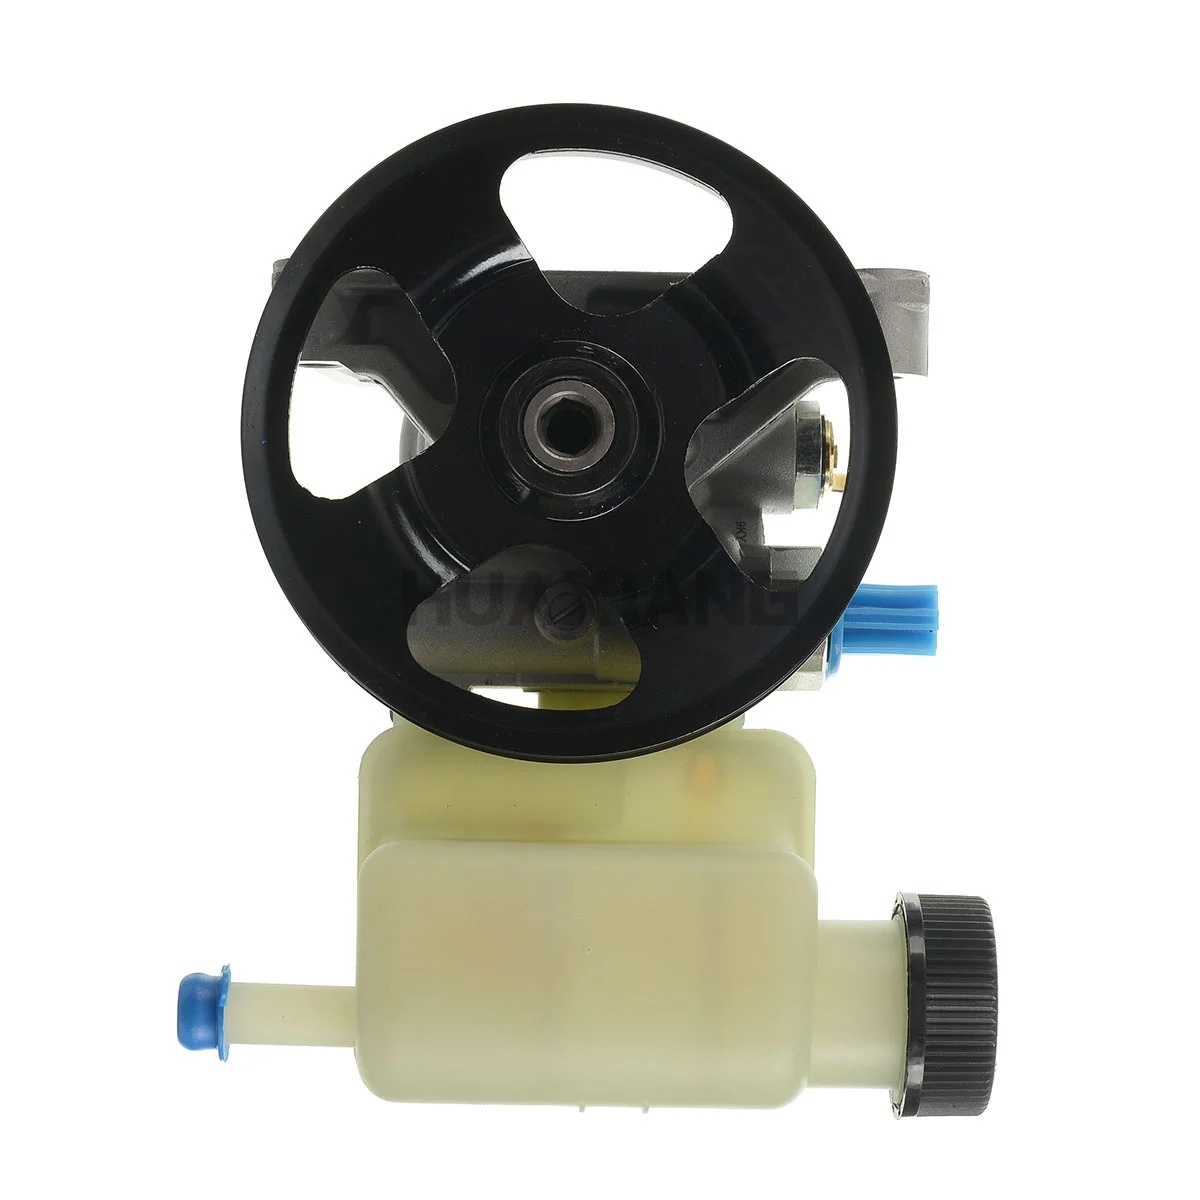 

In-stock CN US CA Power Steering Pump with Pulley with Reservoir for Mazda 6 l4 2.3L V6 3.0L 21-162 GP9A32650